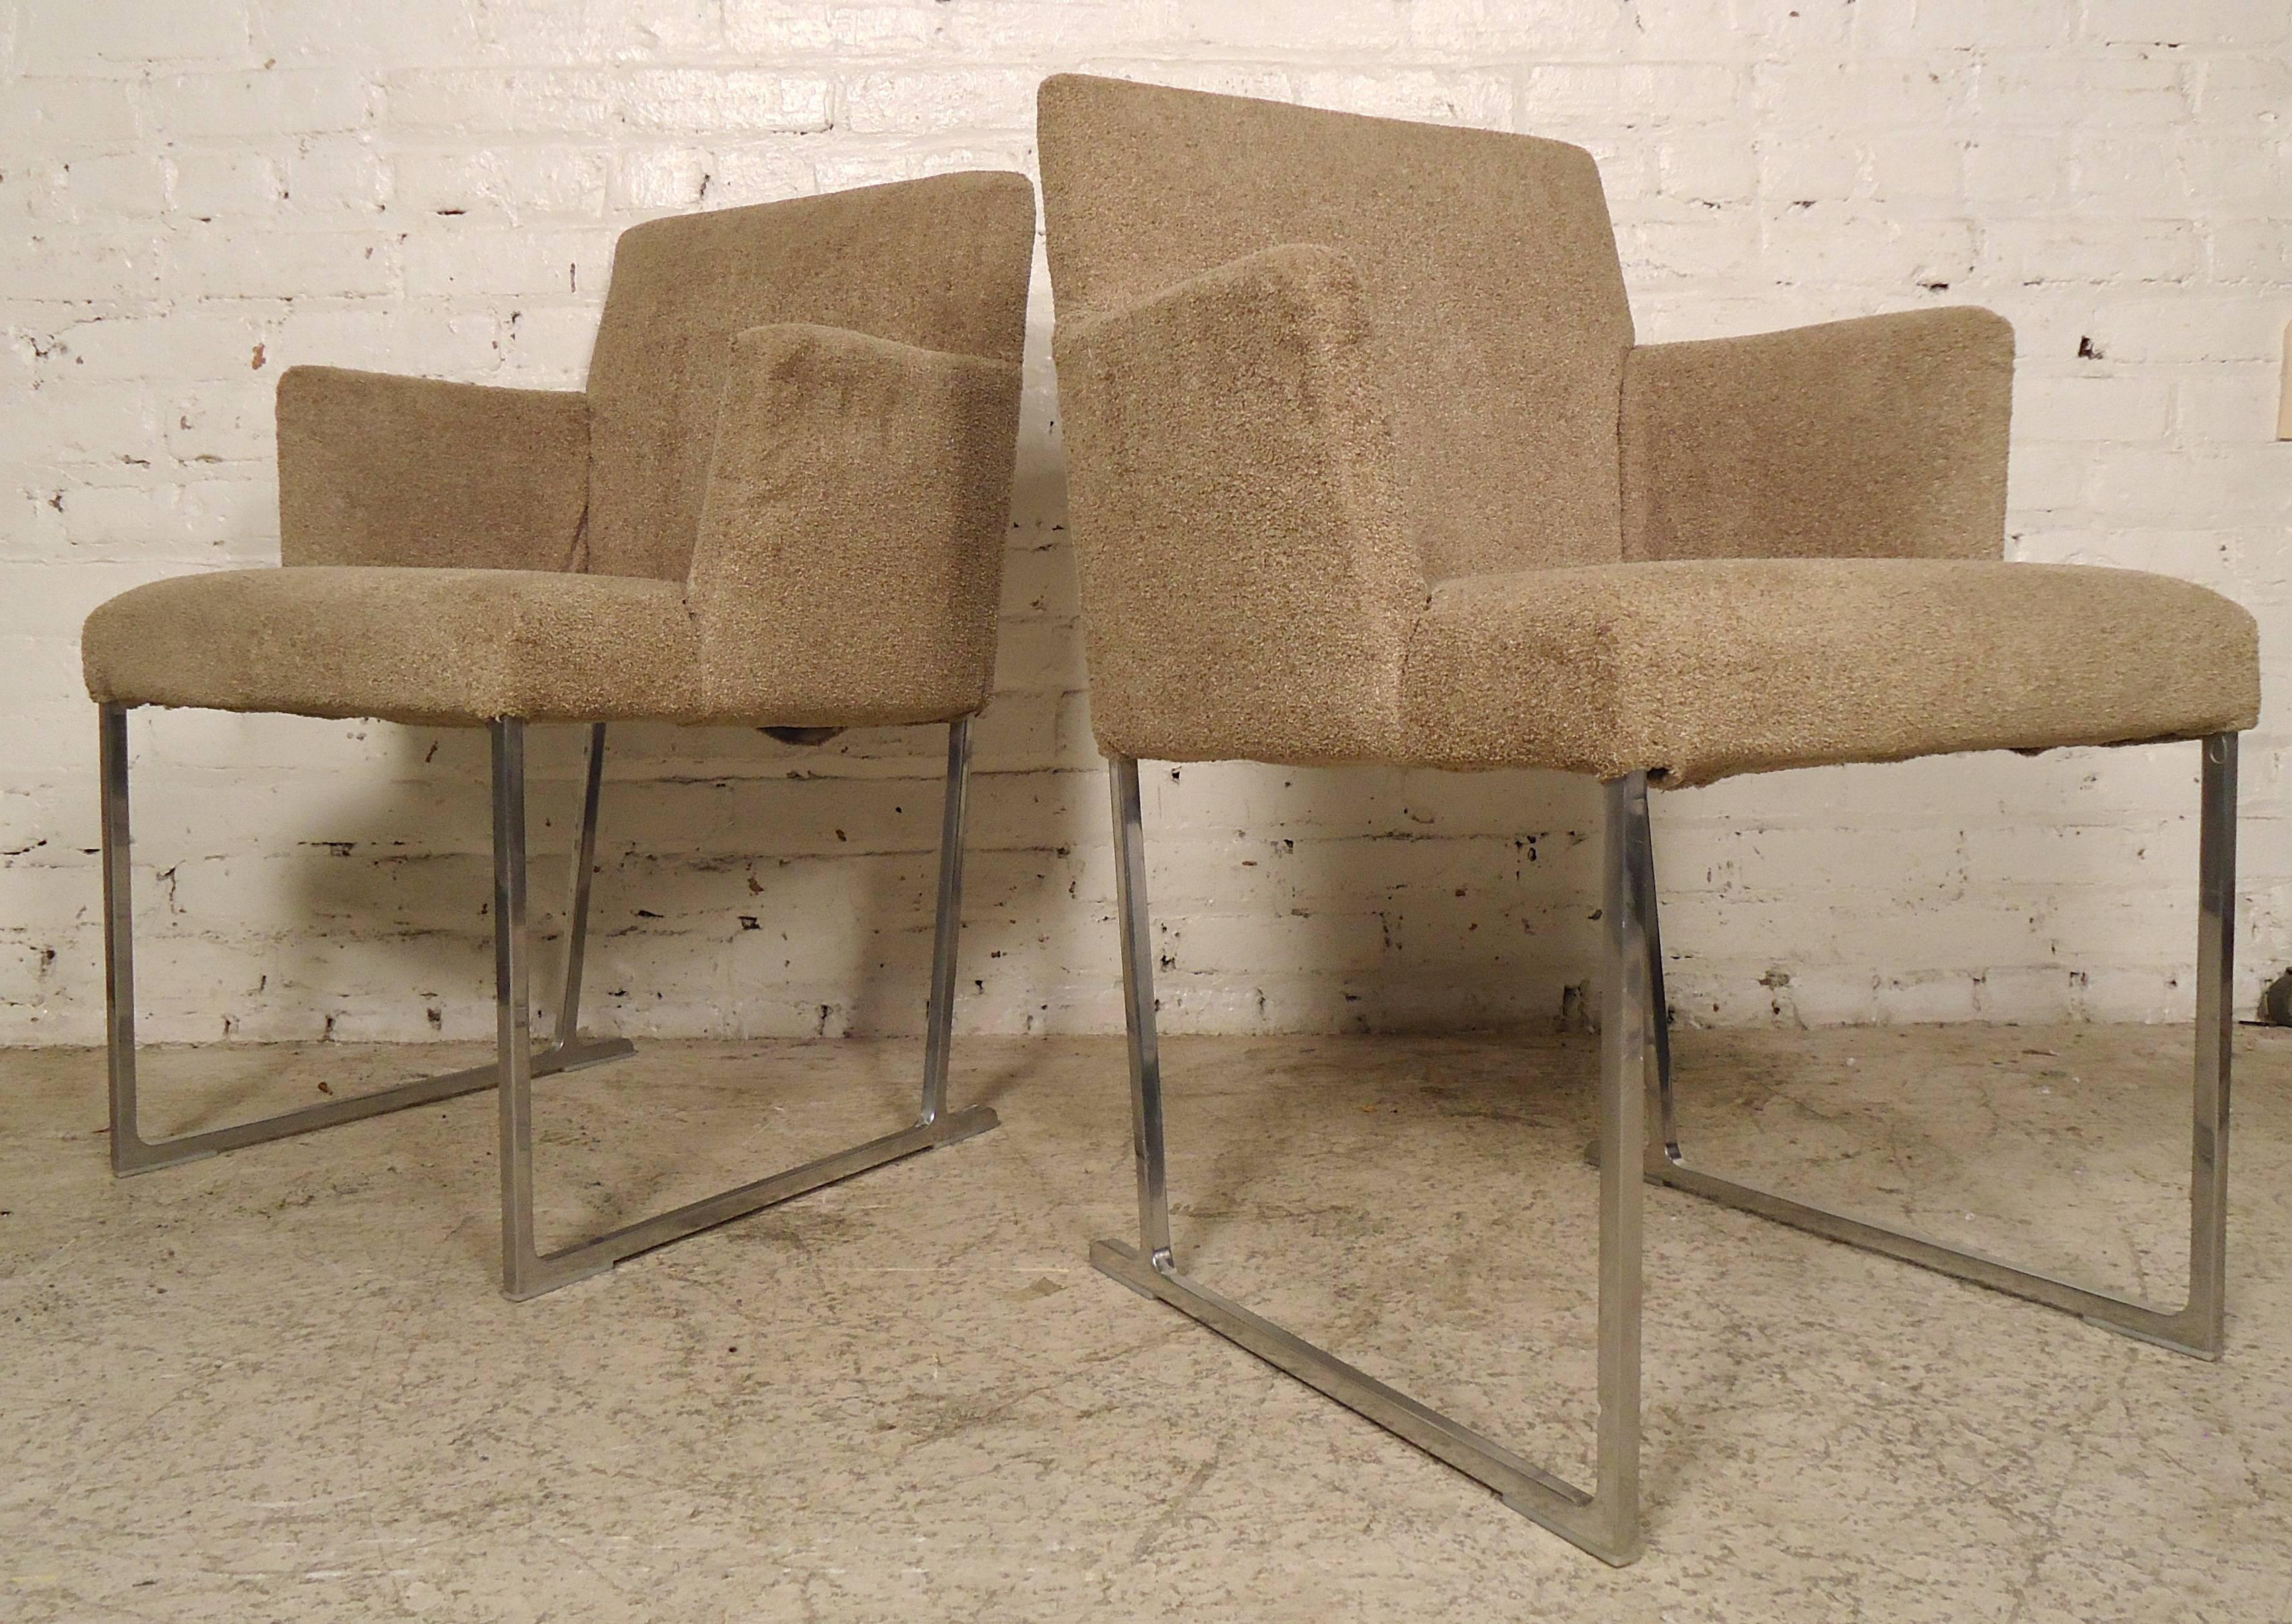 Sleek Mid-Century style chairs with aluminium sled legs. Handsome simple modern lines throughout. 

(Please confirm item location NY or NJ with dealer).
 